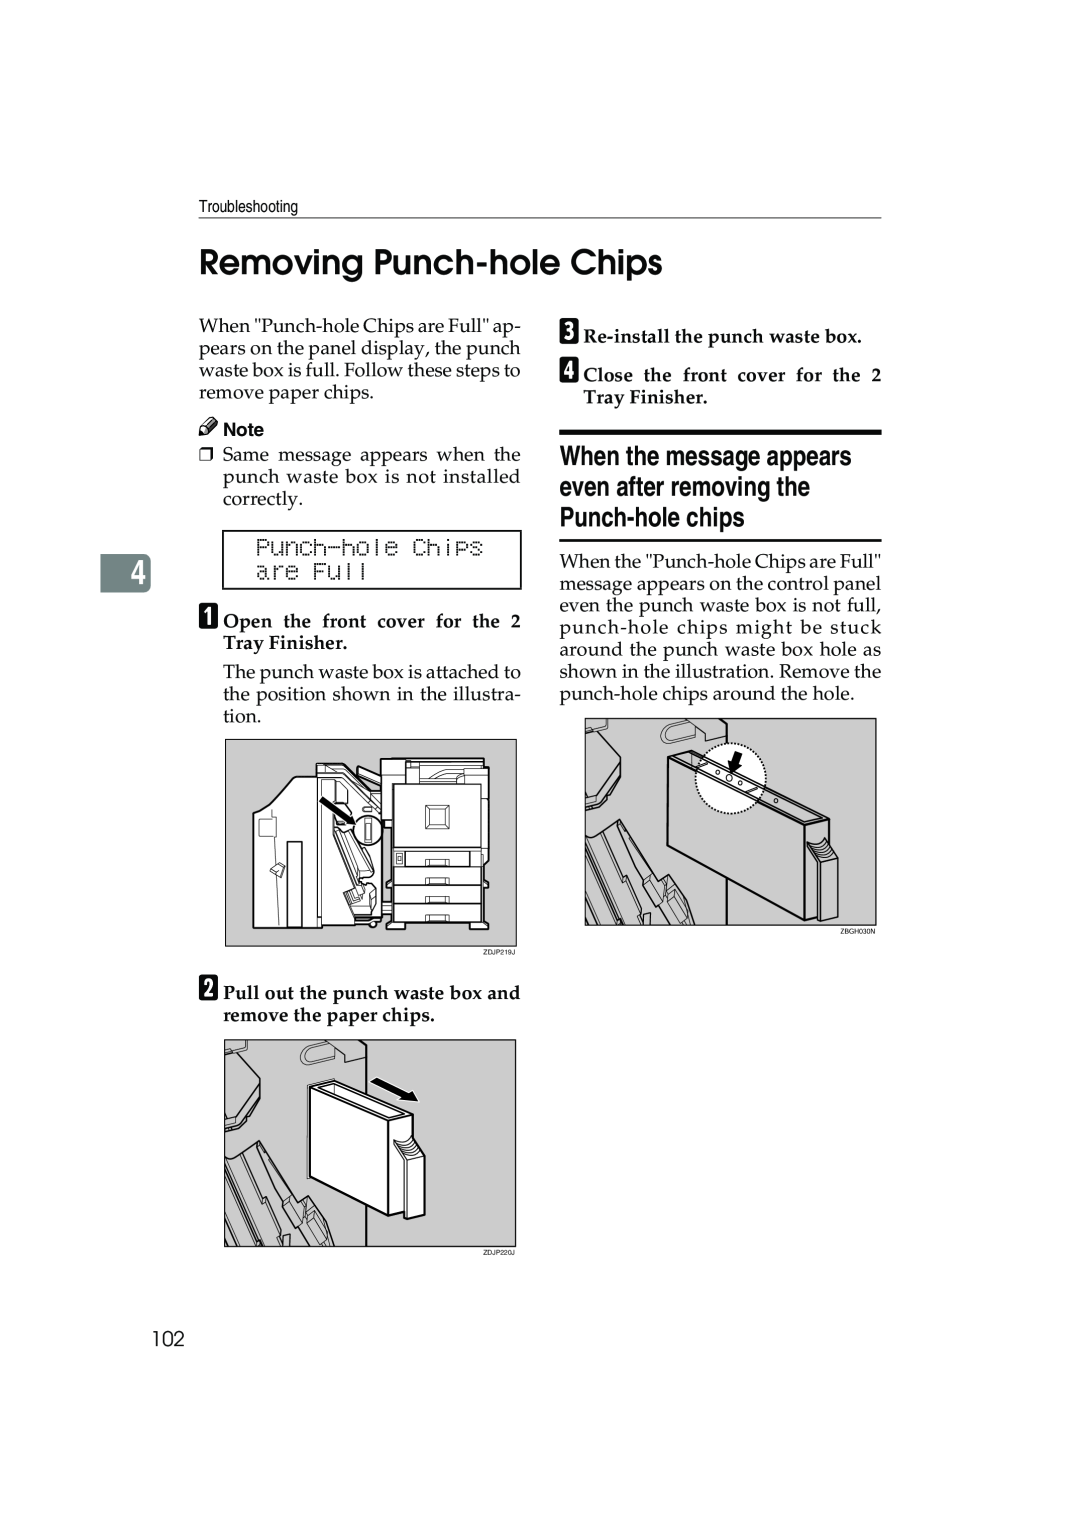 Ricoh AP3800C operating instructions Removing Punch-holeChips, are Full 